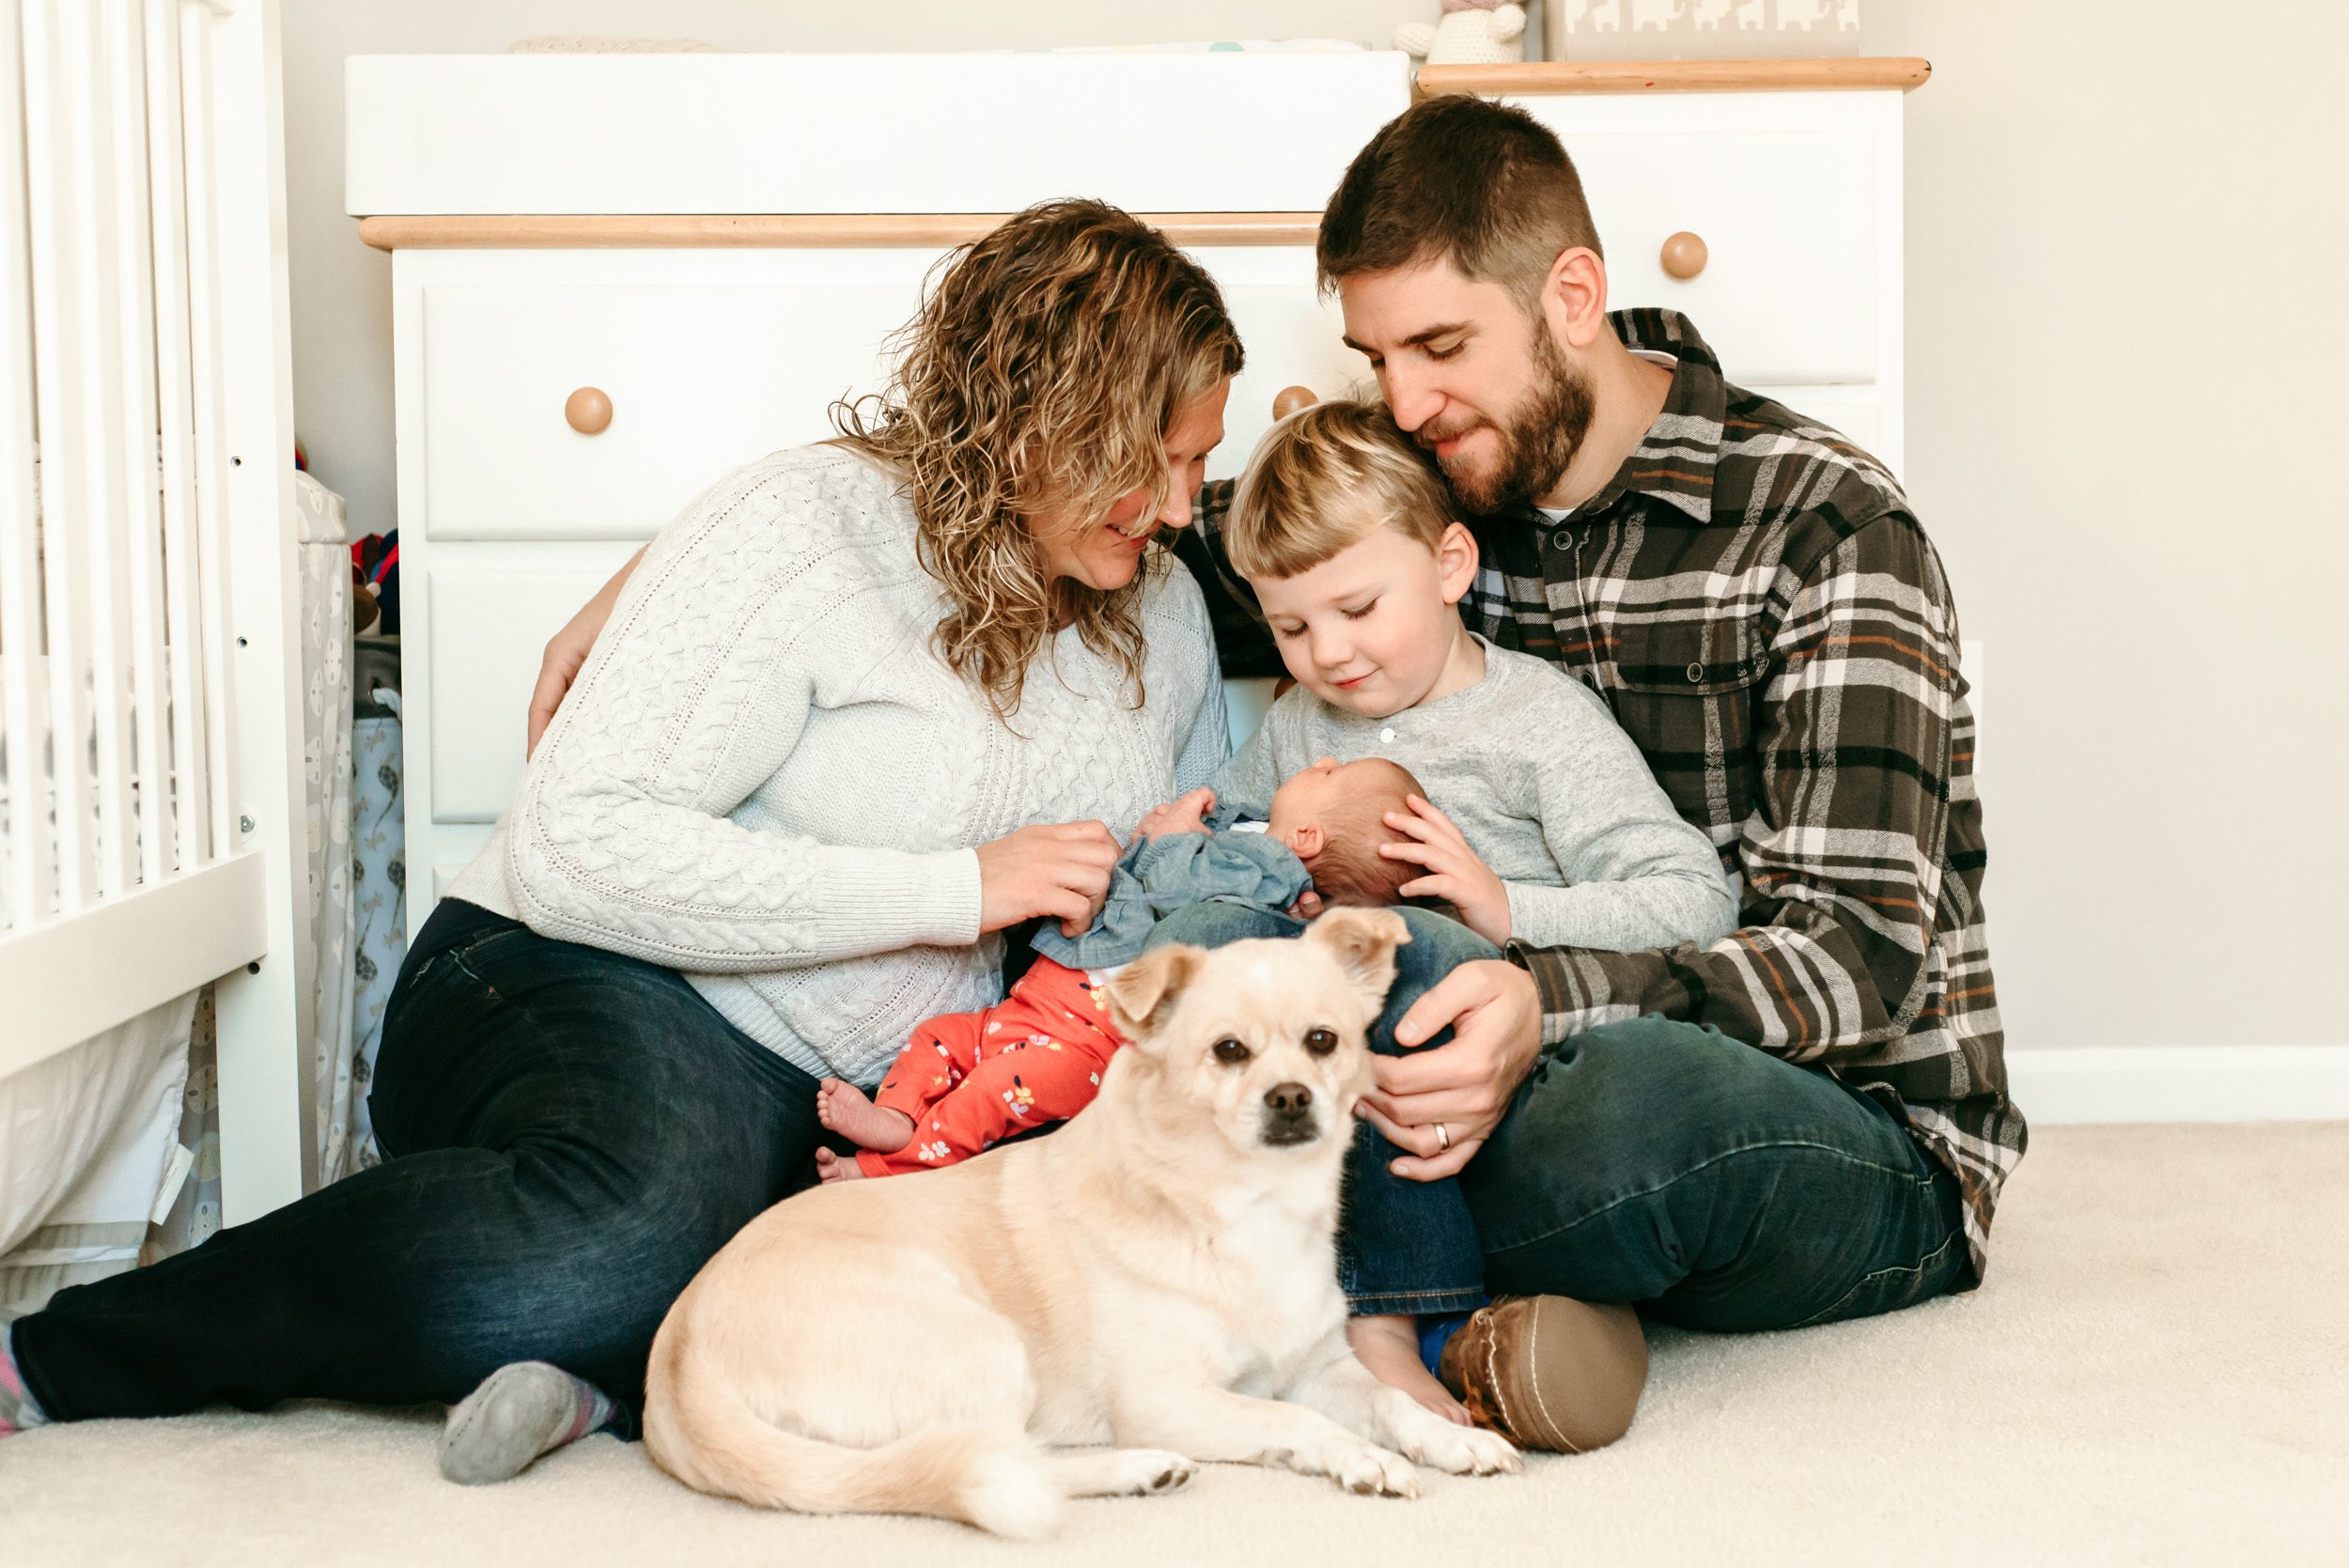 A pet dog looking at the camera while a new family of four snuggles with their newborn baby girl in the background during a natural newborn photoshoot